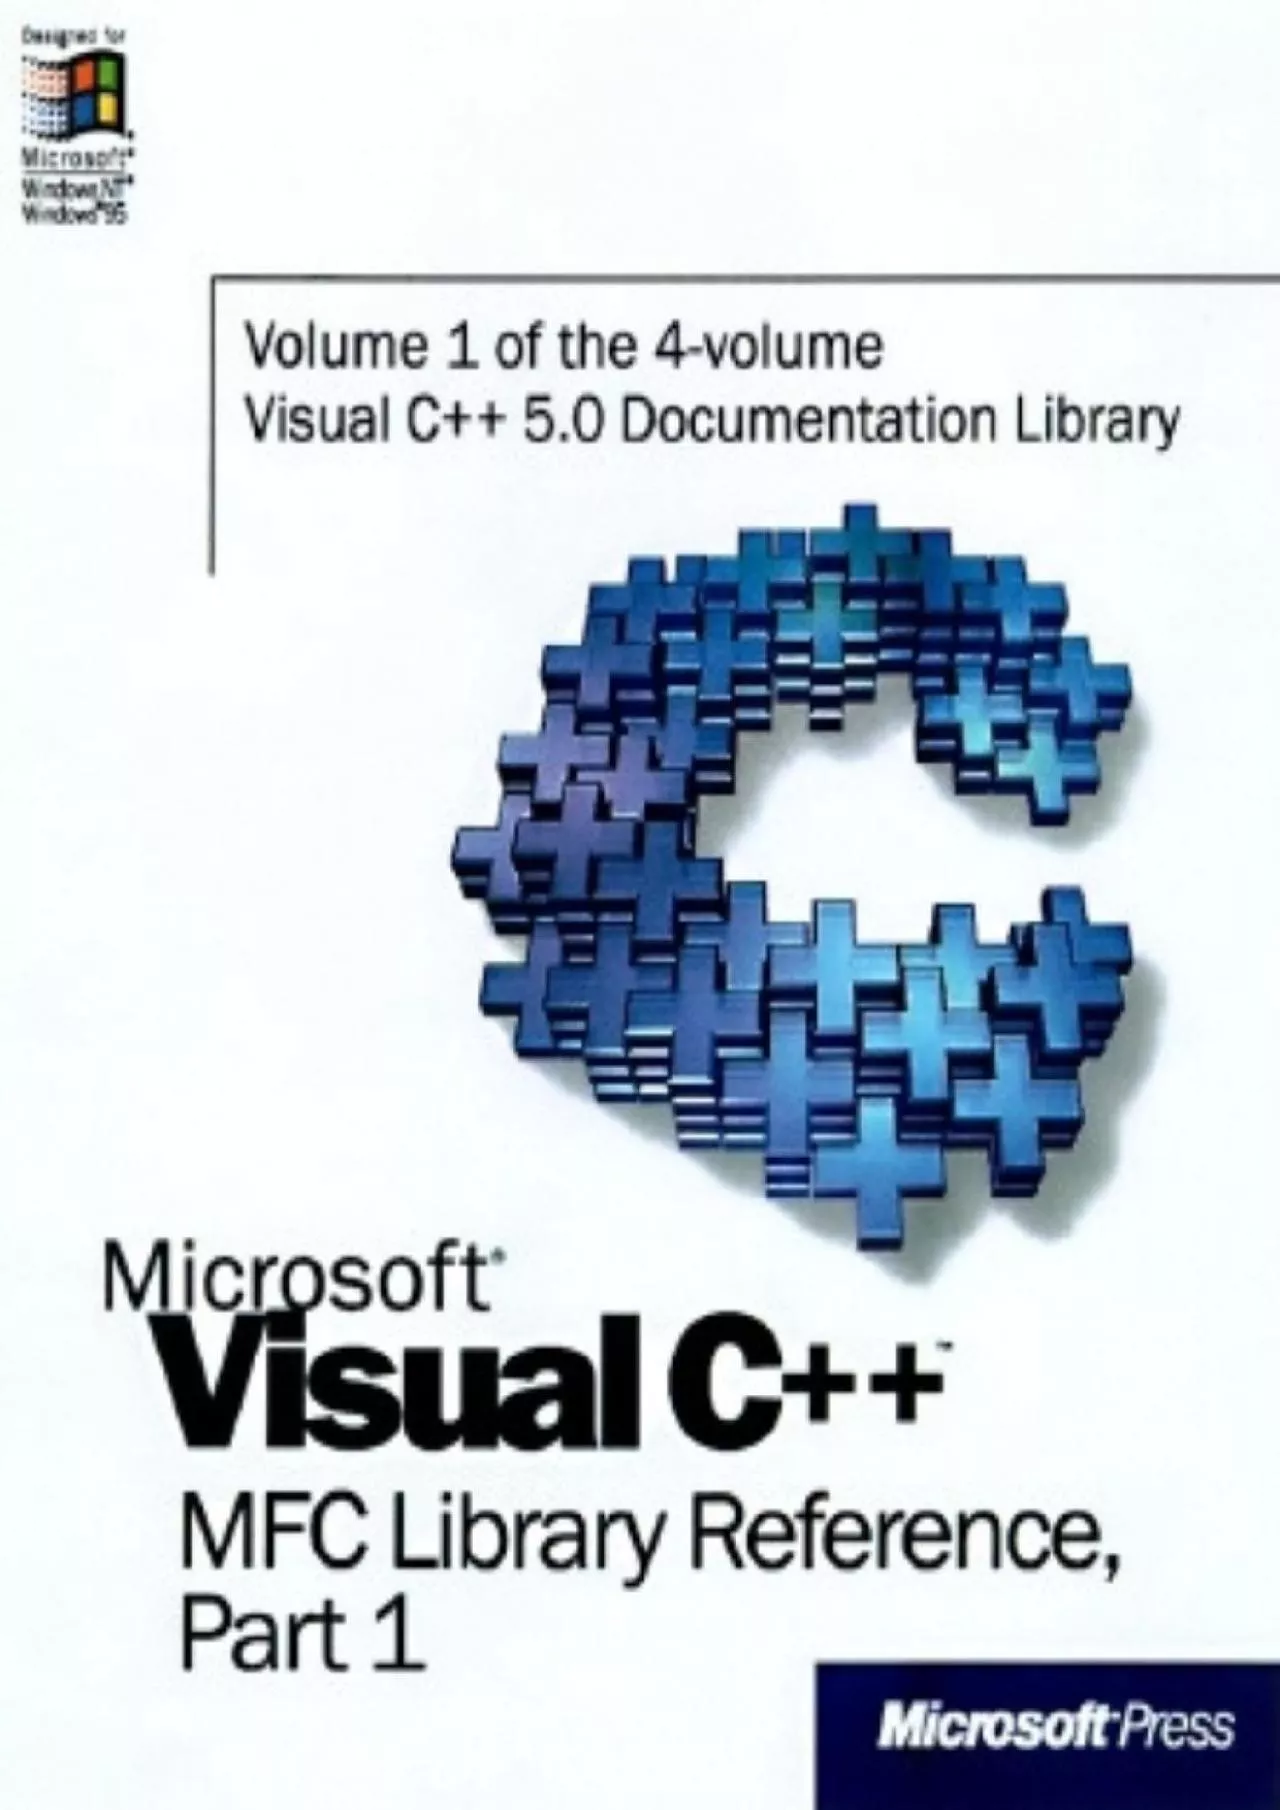 [DOWLOAD]-Microsoft Visual C++ MFC Library Reference, Part 1 (Visual C++ 5.0 Documentation